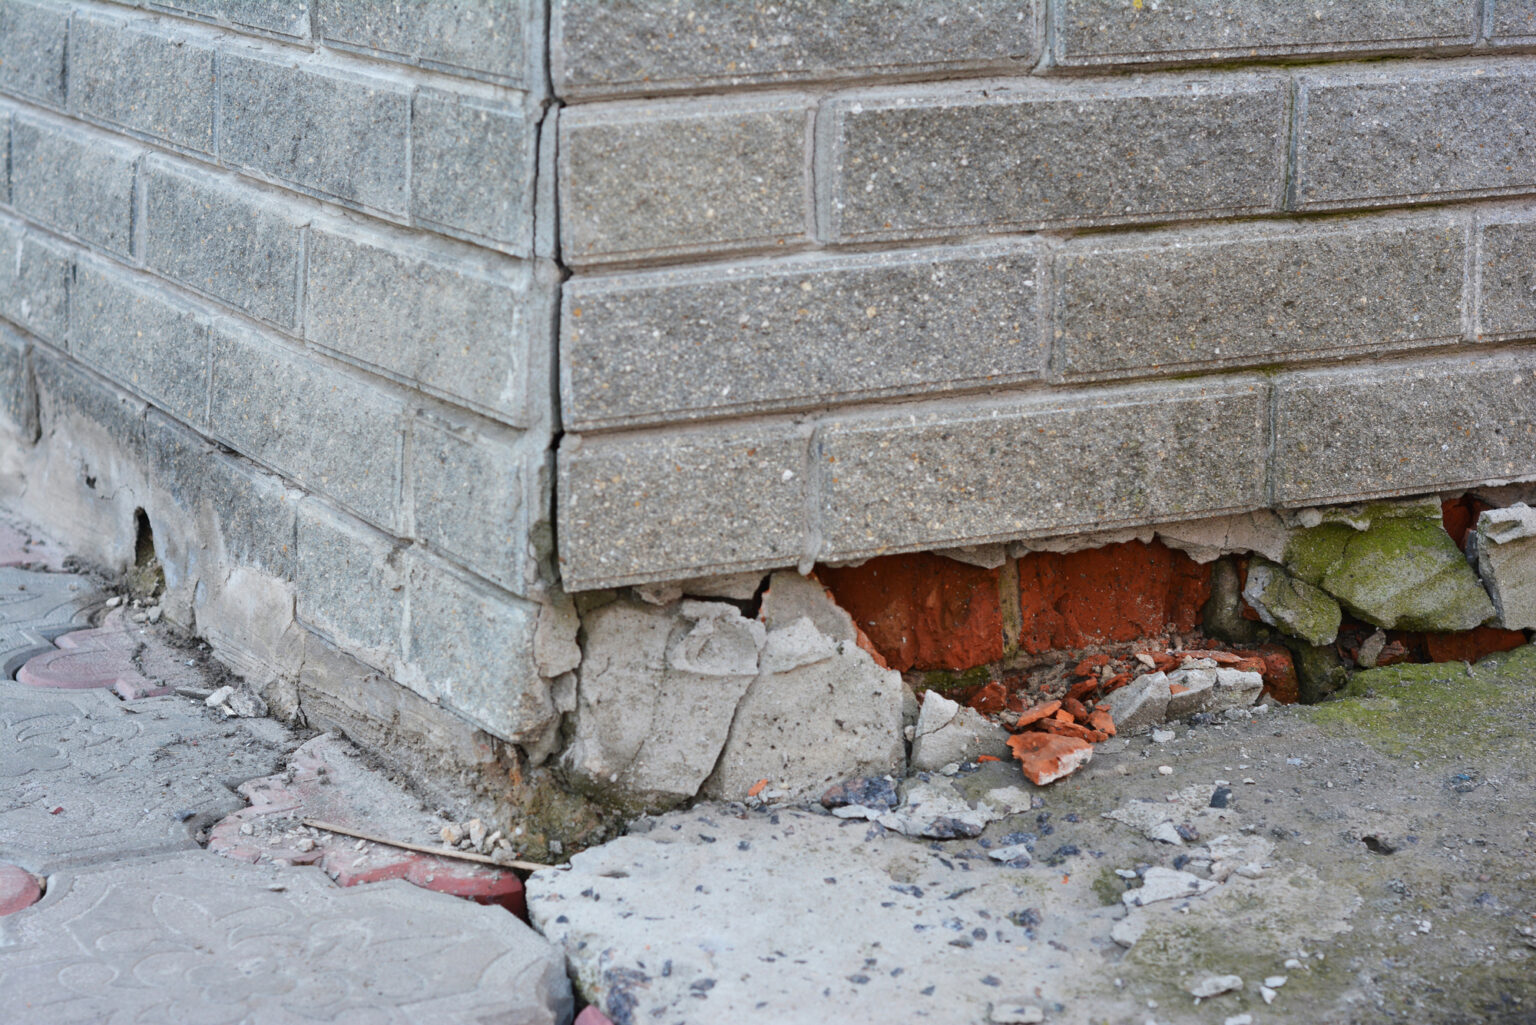 Photo of a cracked/crumbling grey brick foundation.